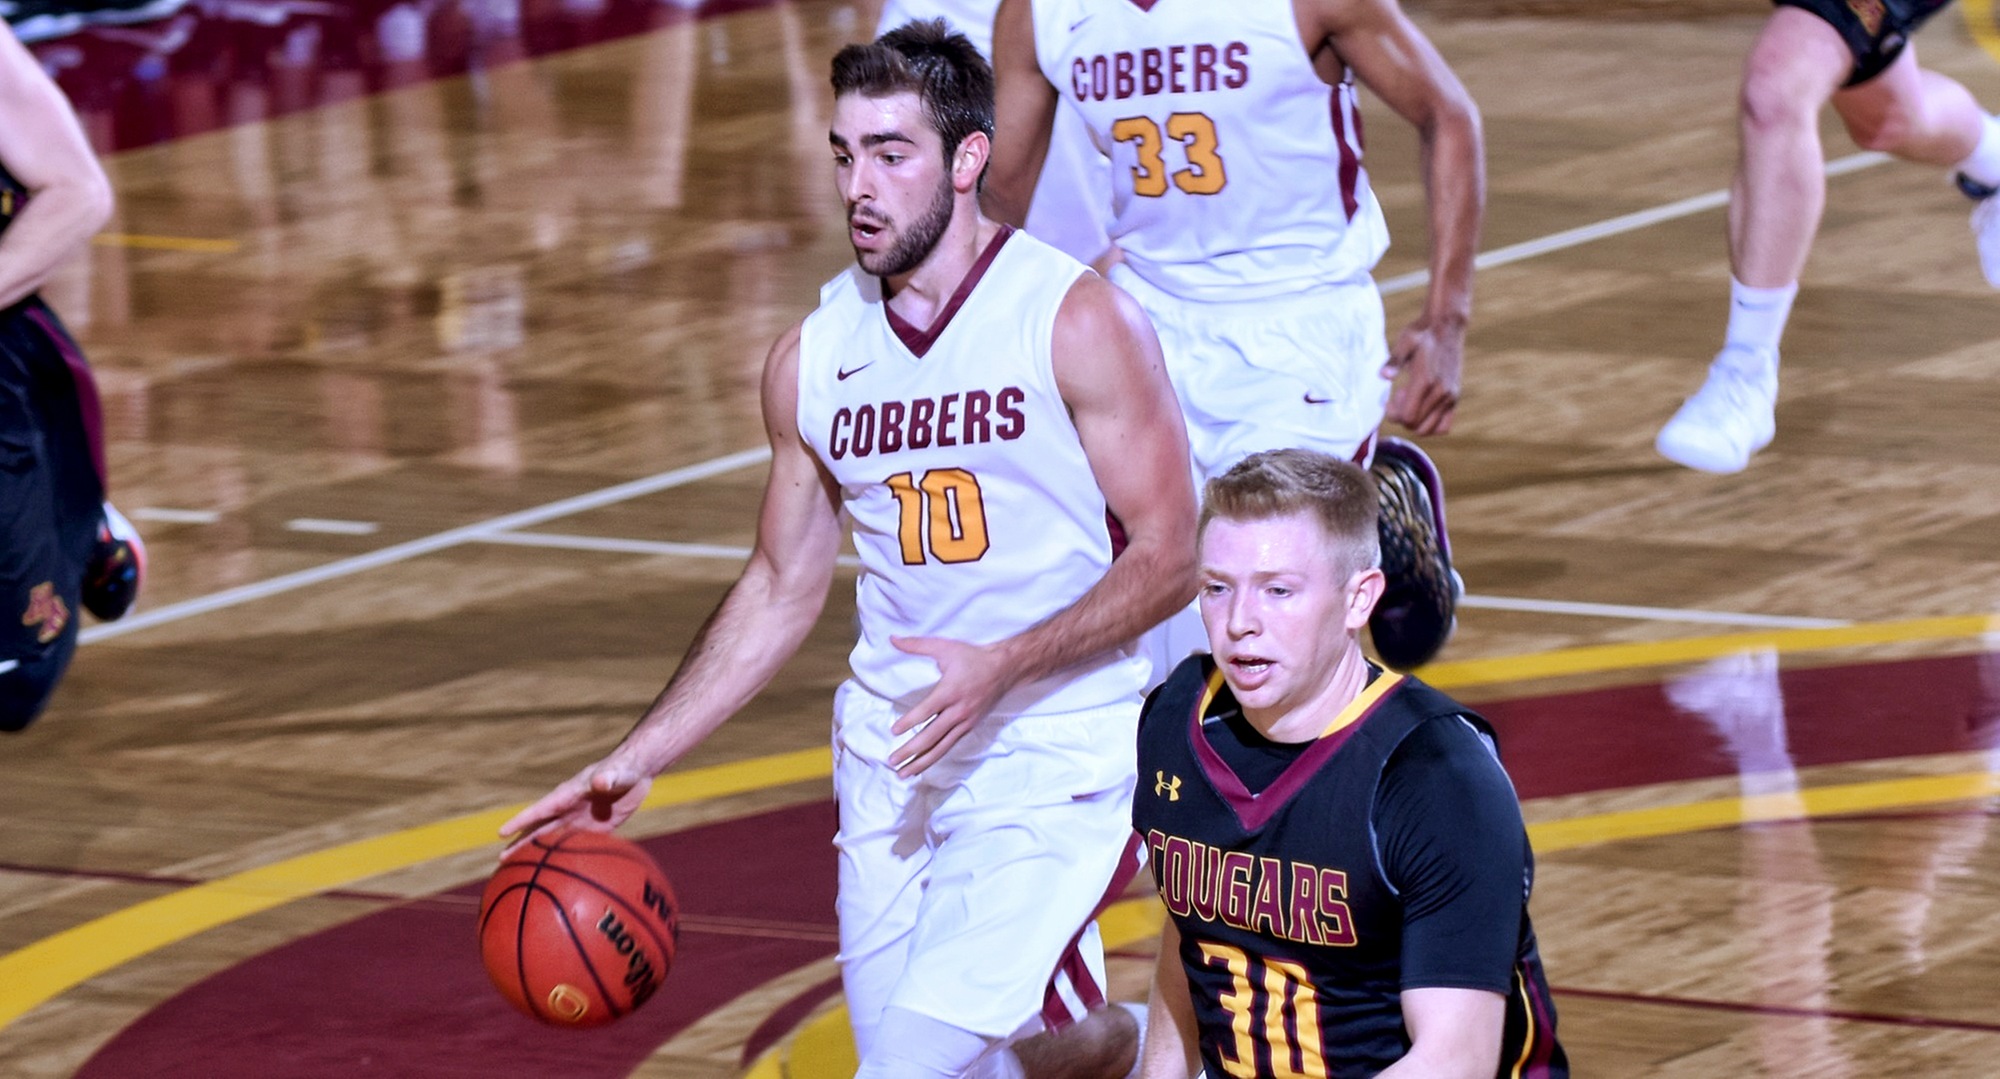 Senior Tommy Schyma dribbles the ball up the court on the fast break during the Cobbers' season opener with Minn.-Morris. He led all players with 27 points.